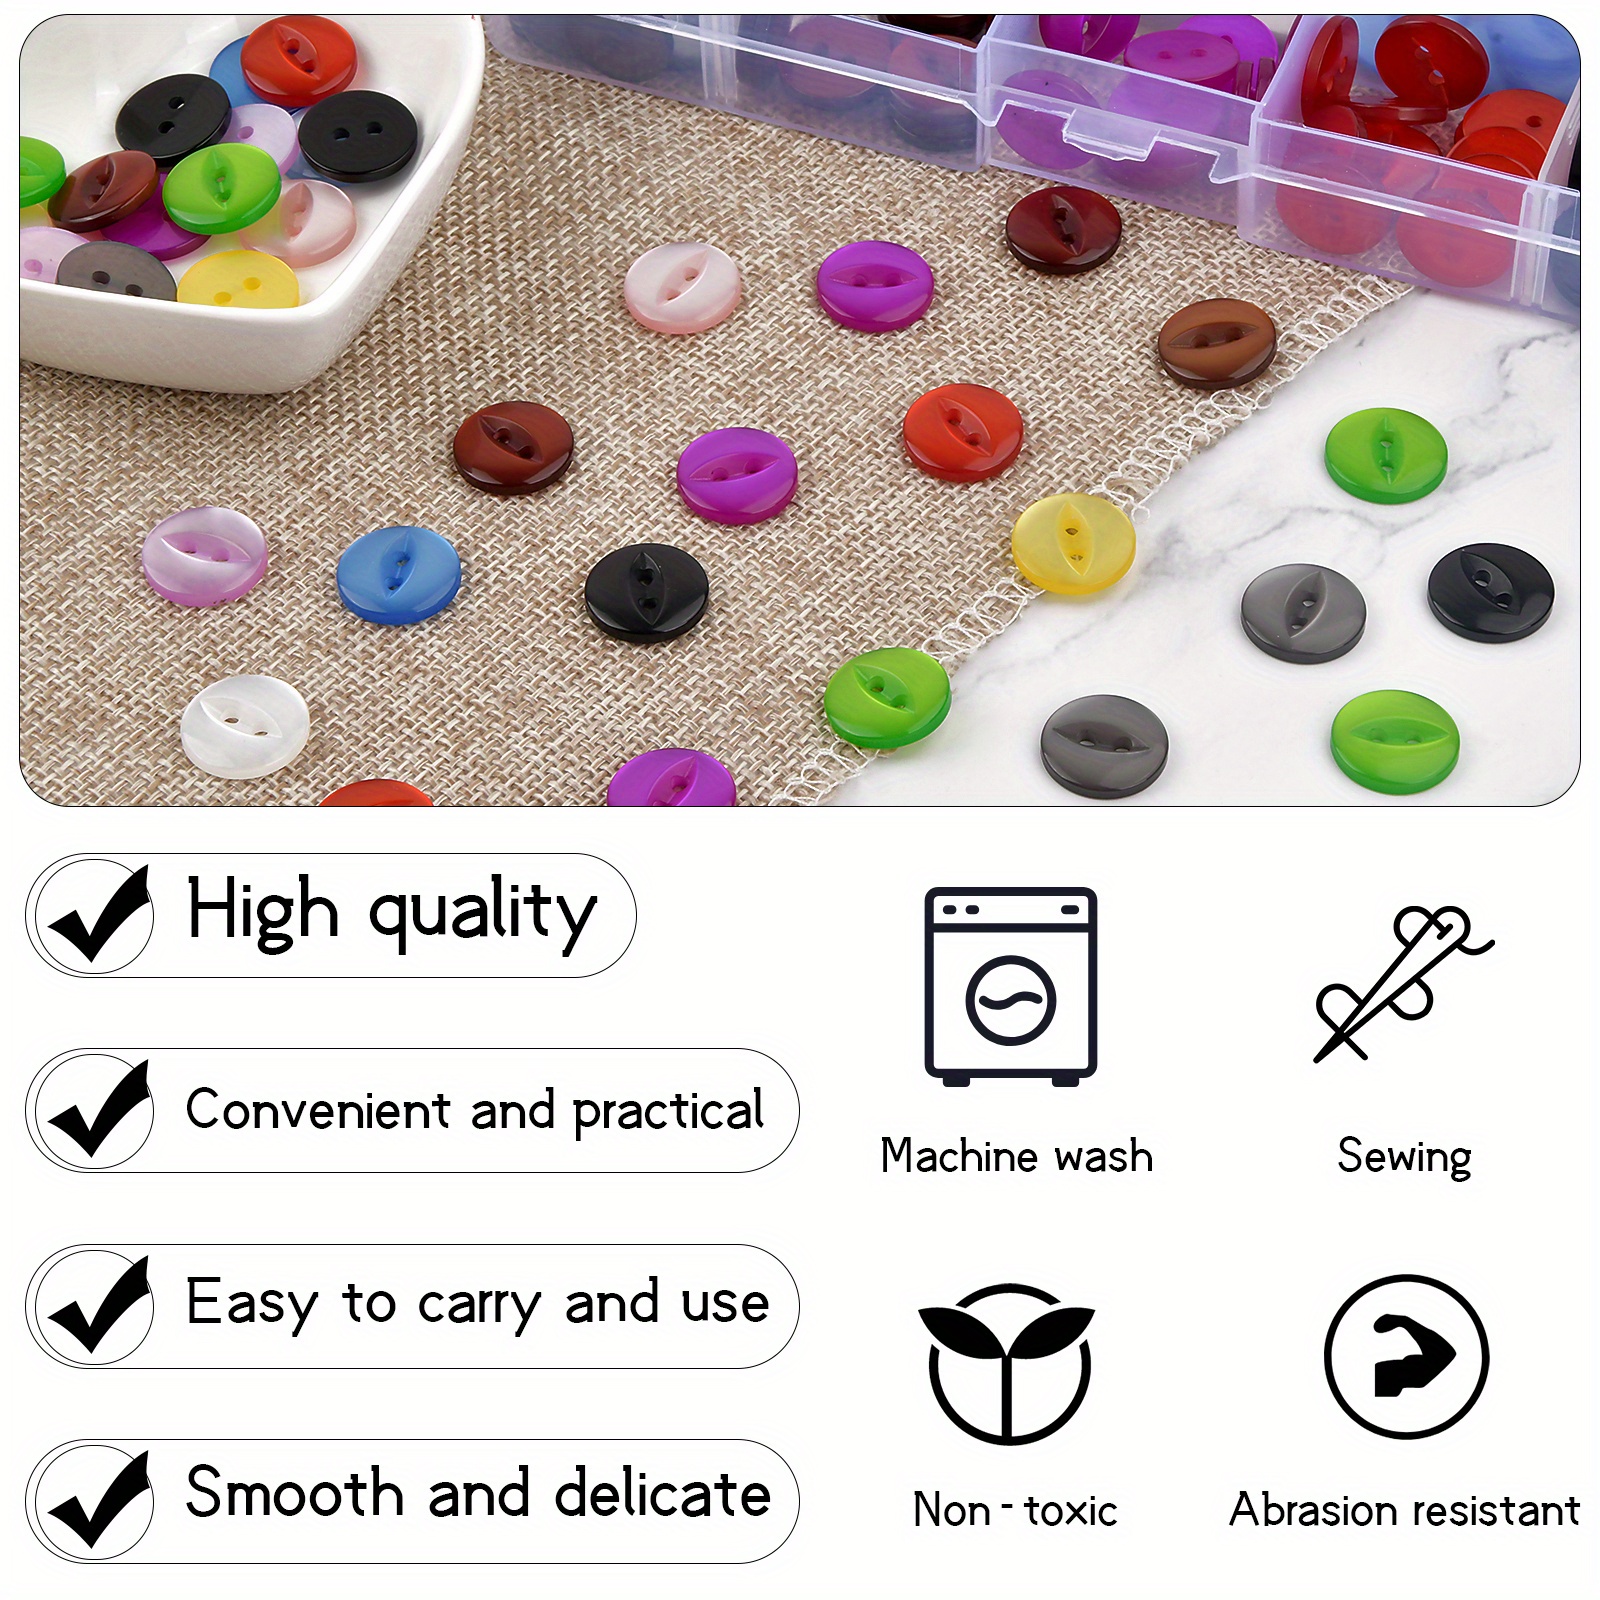 70 Small Buttons, 9 mm Resin Buttons, Wholesale Bulk Buttons, Sewing